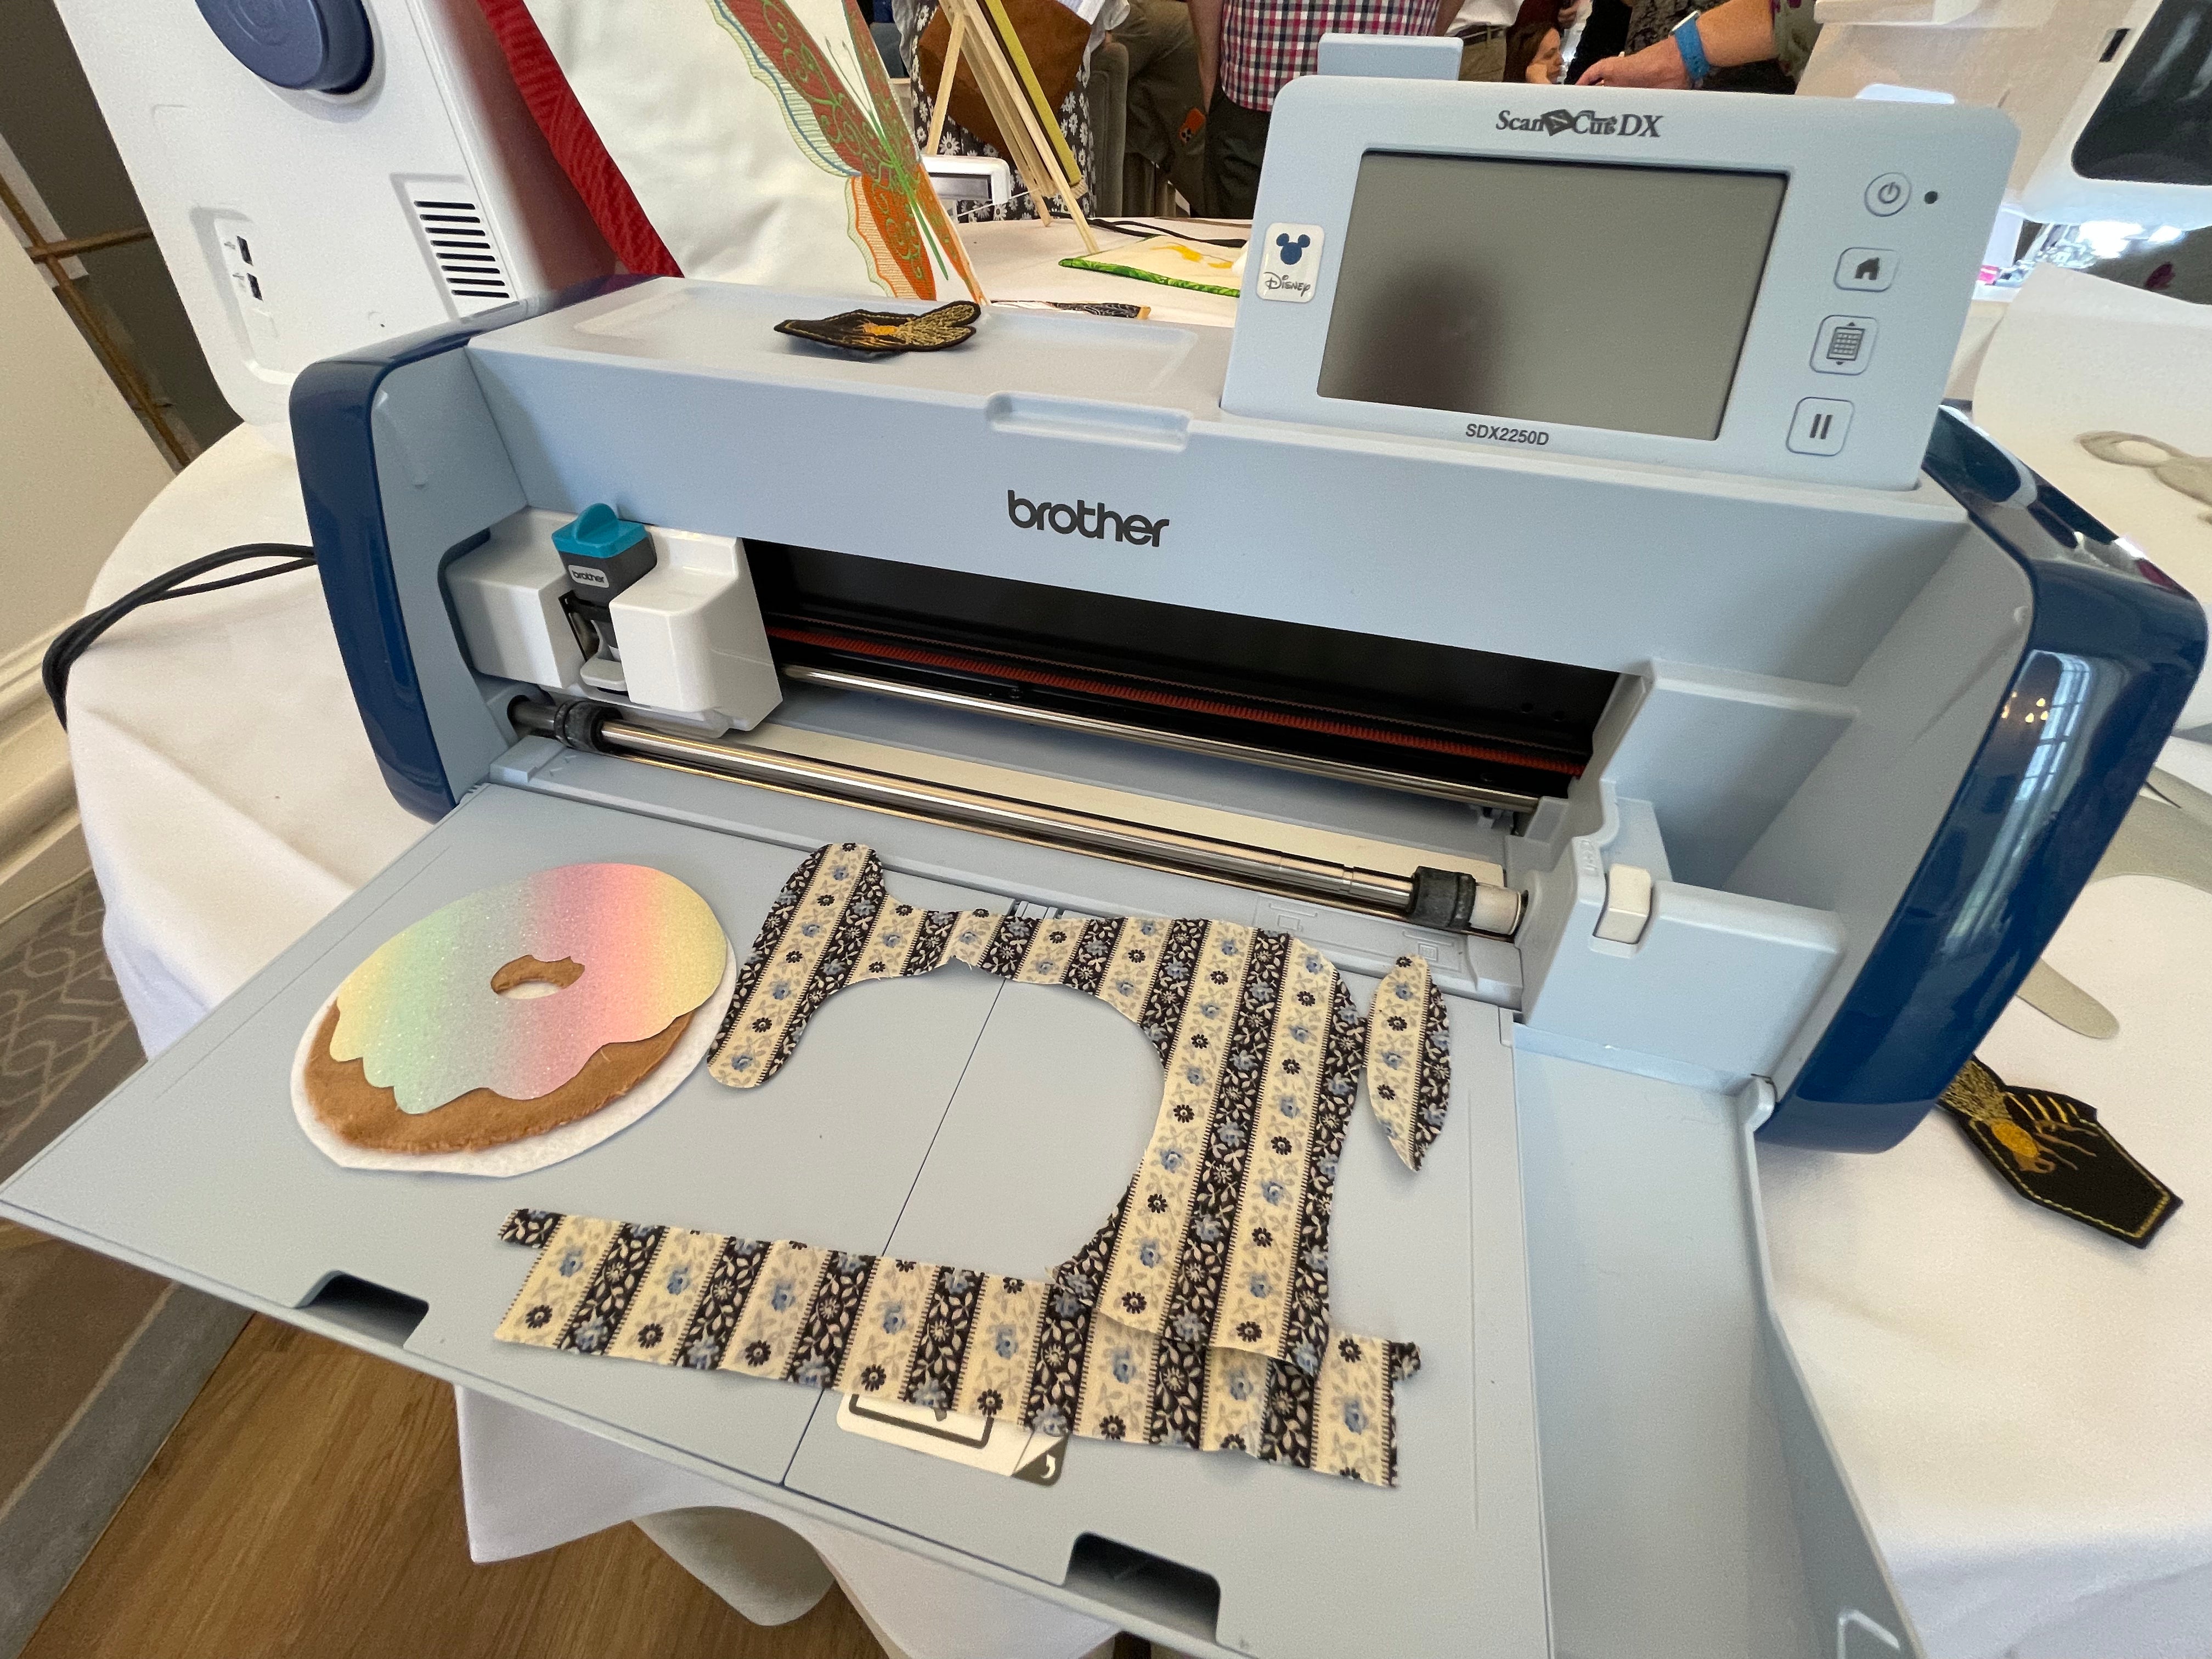 Brother ScanNcut SDX2250D - Sewing Machine Sales